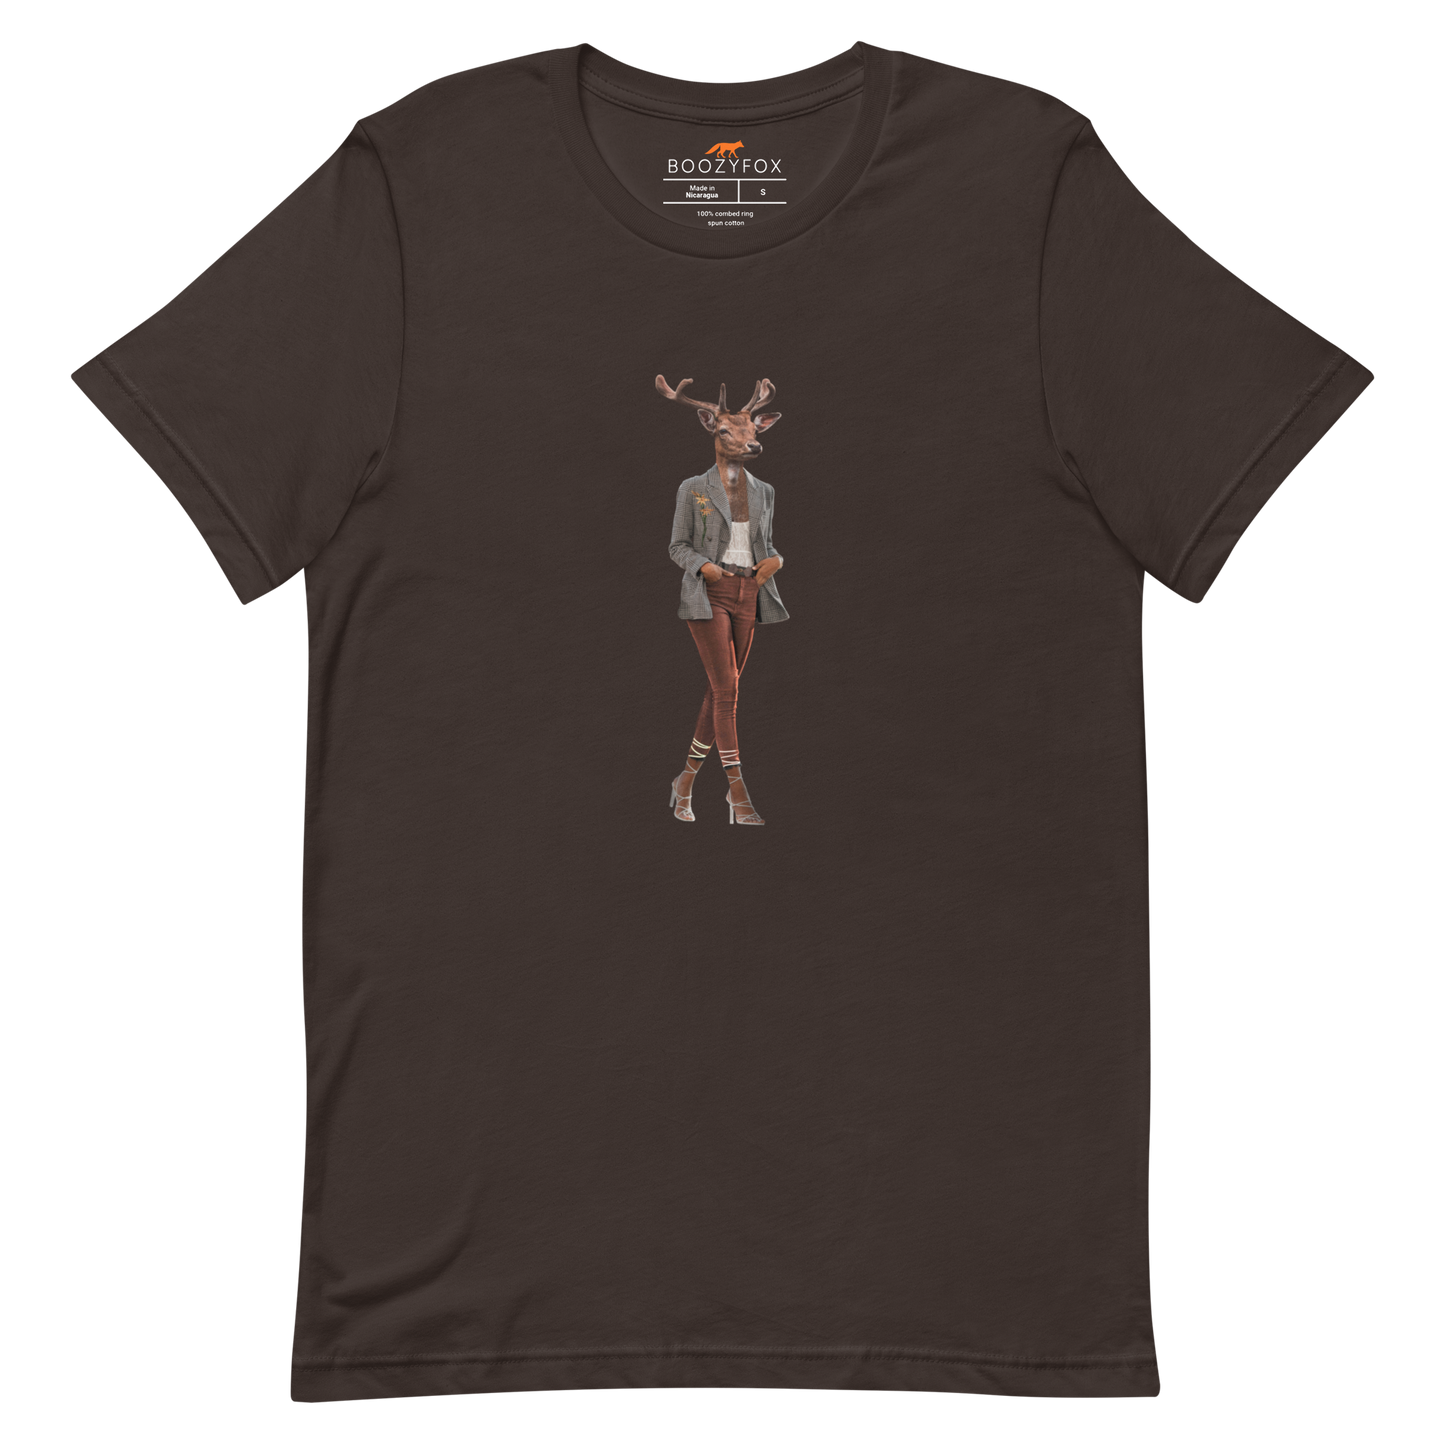 Brown Premium Deer T-Shirt featuring an Anthropomorphic Deer graphic on the chest - Funny Graphic Deer Tees - Boozy Fox